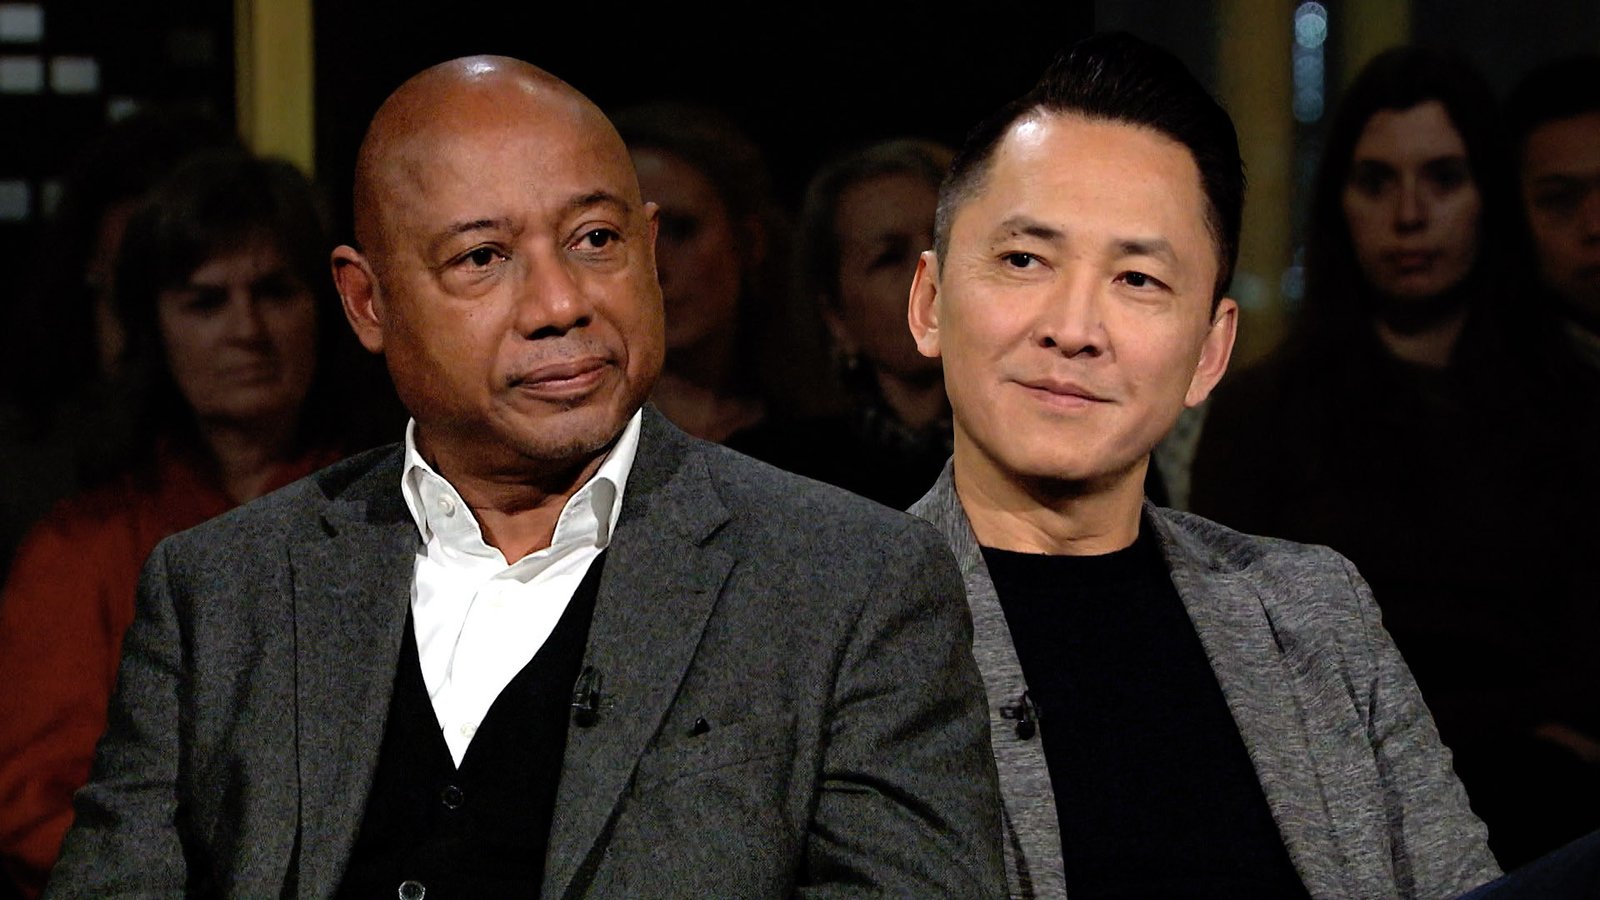 Art, violence and resistance: Raoul Peck and Viet Thanh Nguyen | Al Jazeera